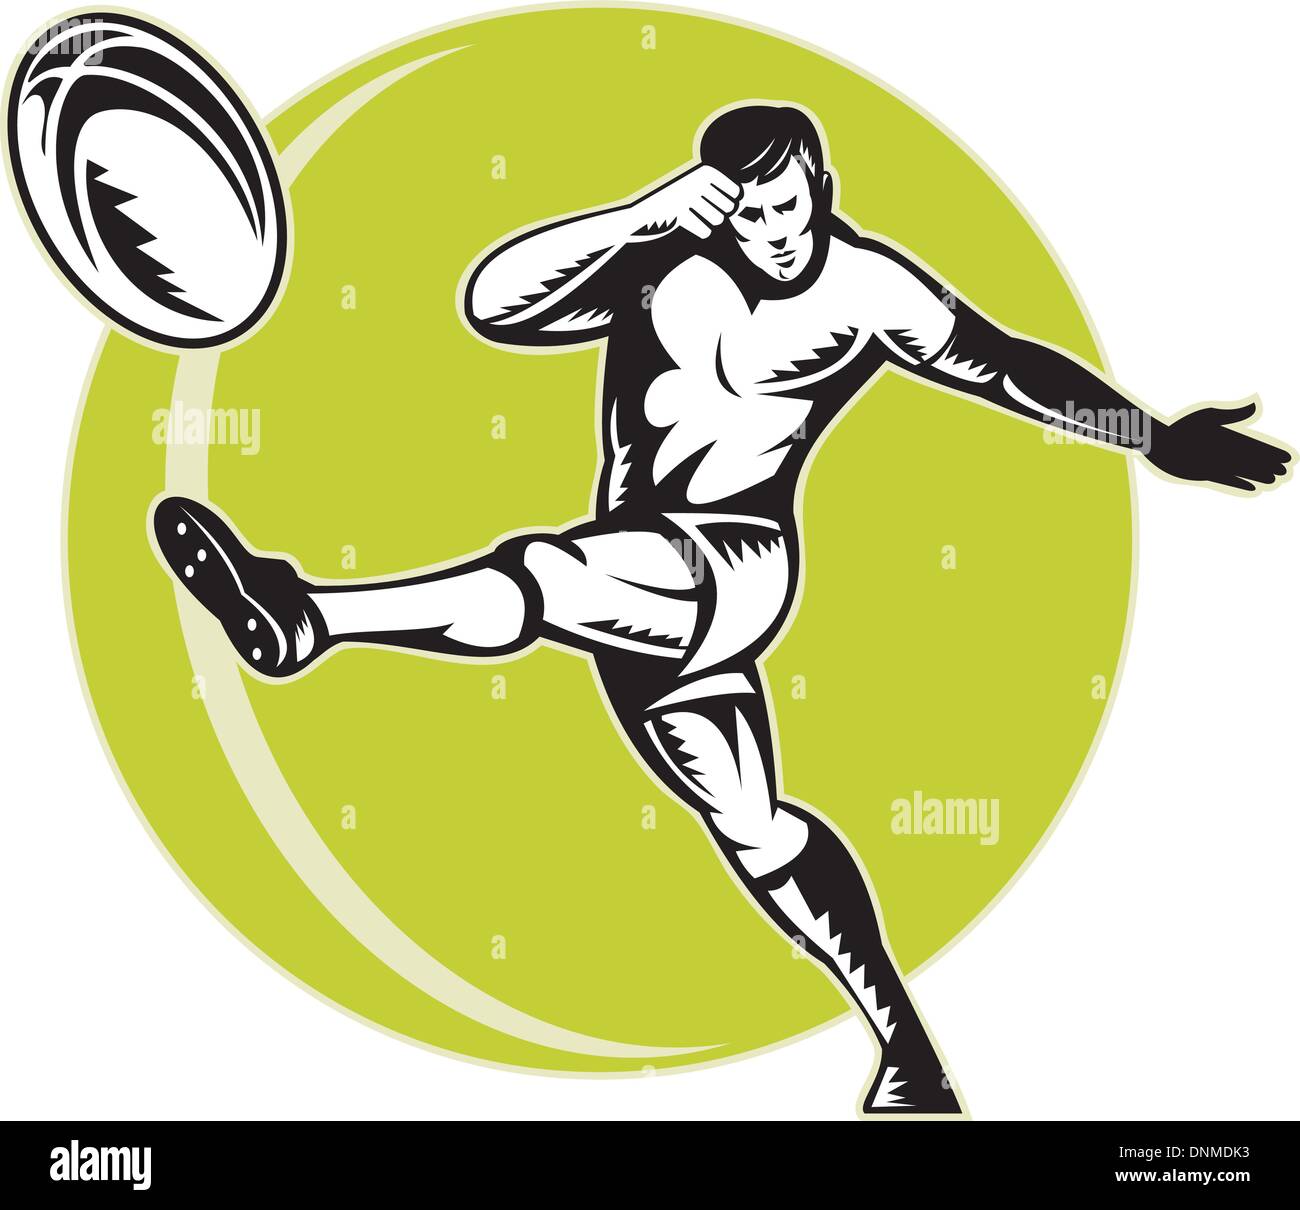 illustratoion of a rugby player kicking ball retro woodcut style. Stock Vector